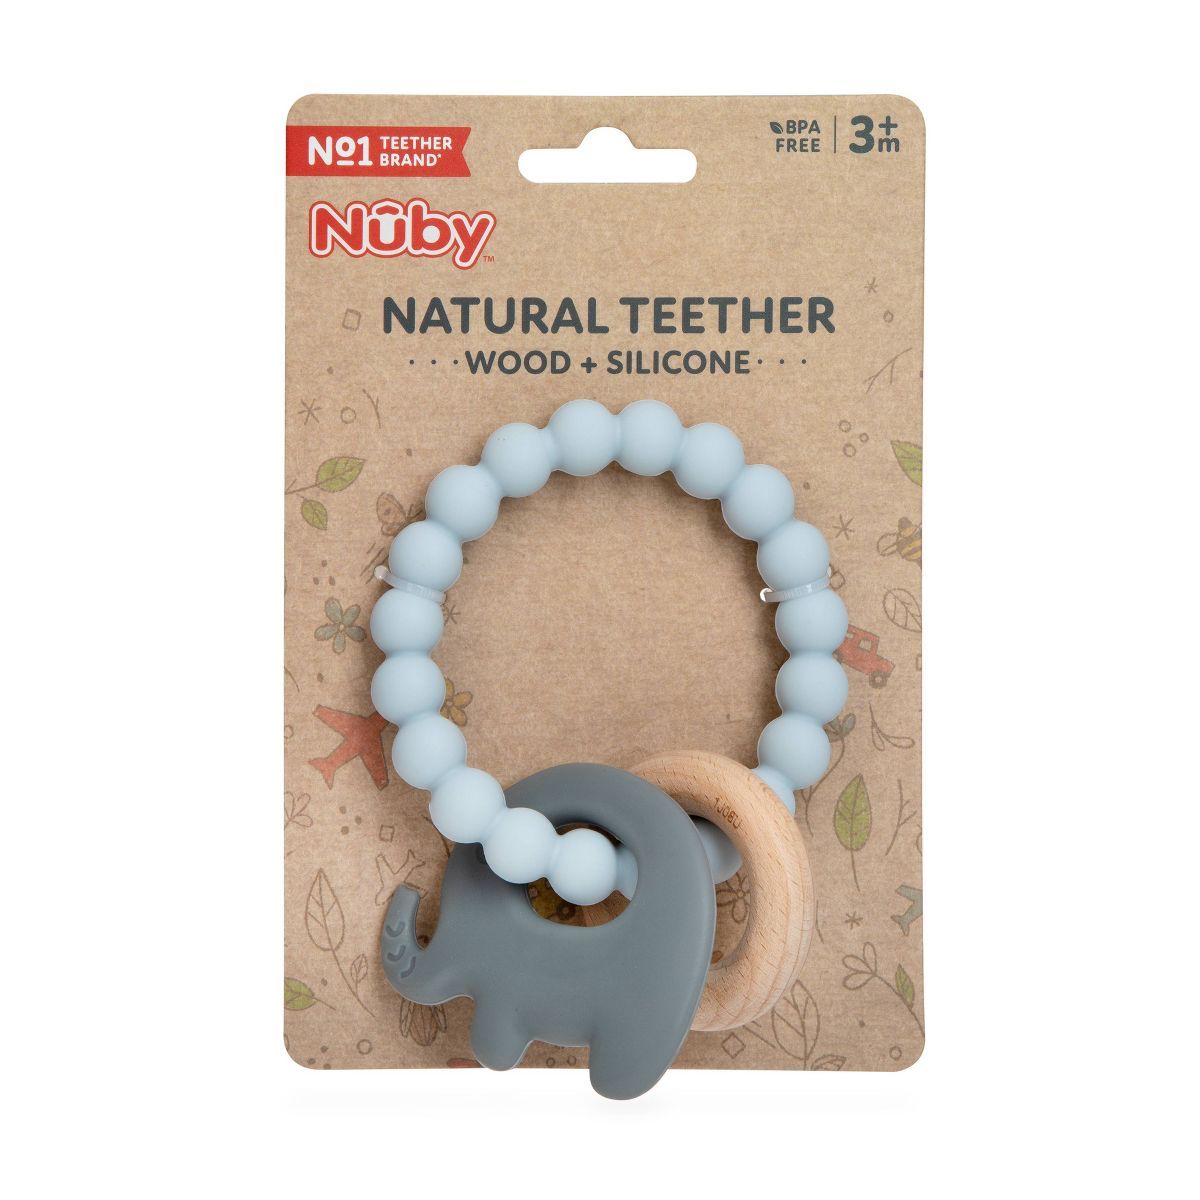 Nuby Silicone and Wood Teething Bracelet - Gray | Target